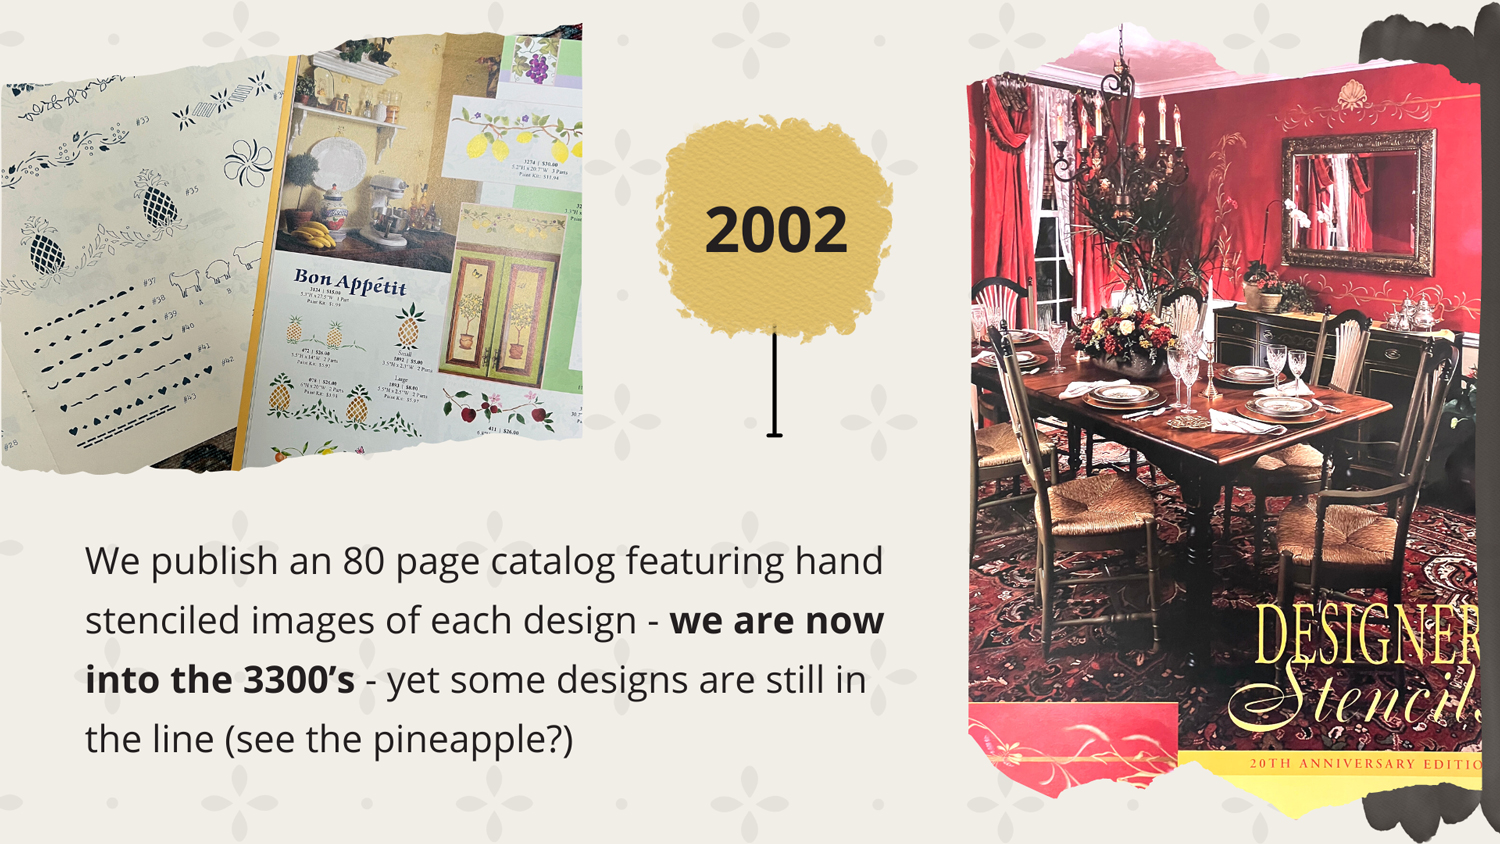 2002 - We publish an 80 page catalog featuring hand stenciled images of each design - we are now into the 3300’s - yet some designs are still in the line (see the pineapple?)